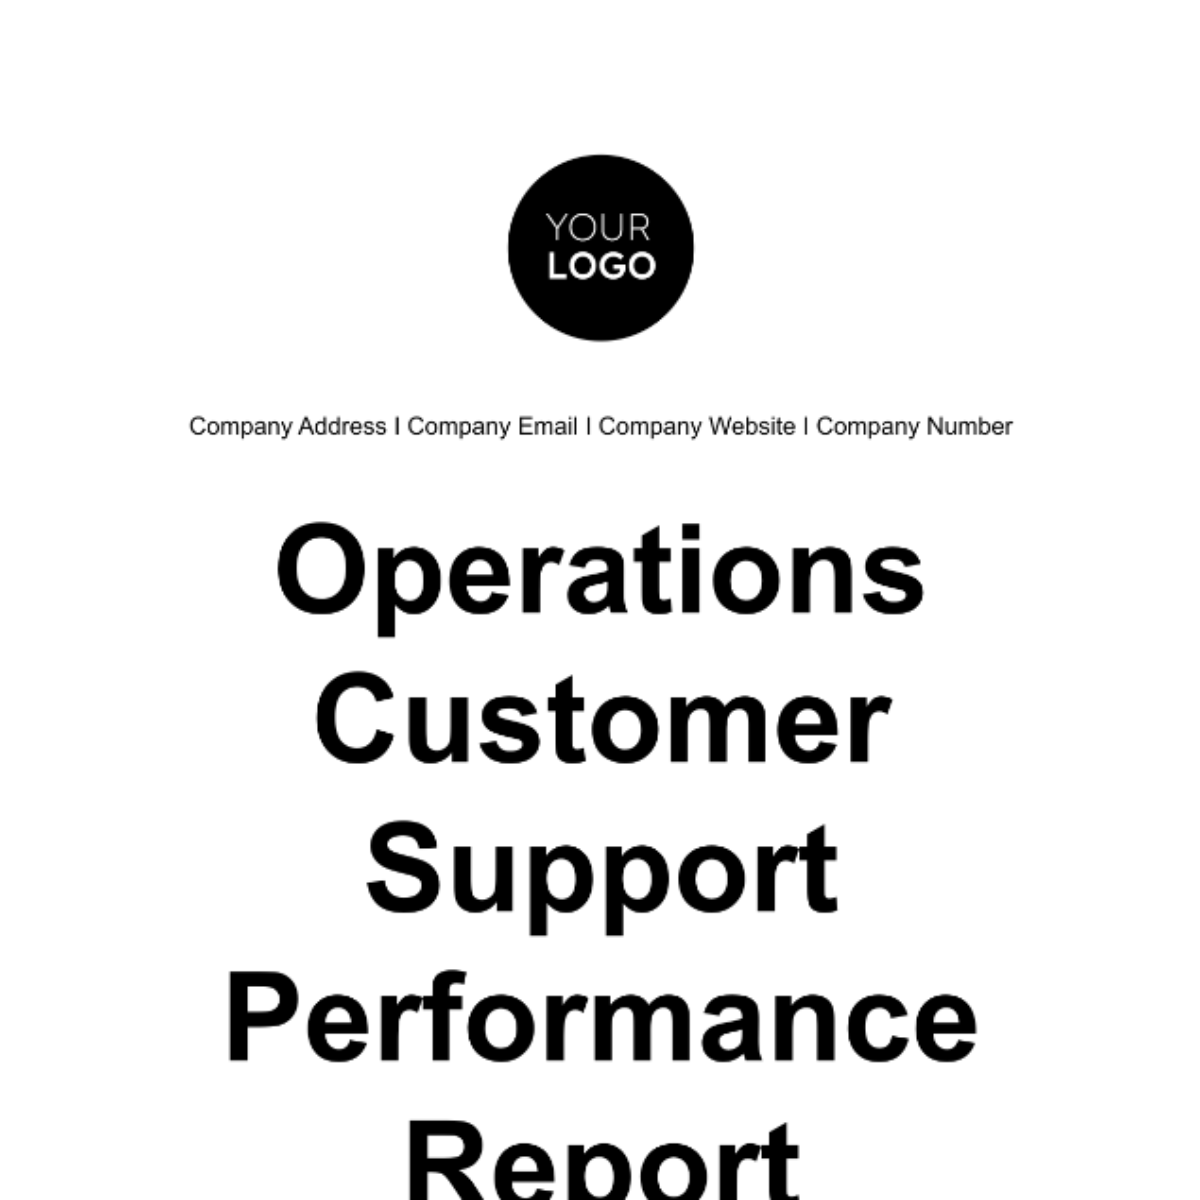 Operations Customer Support Performance Report Template